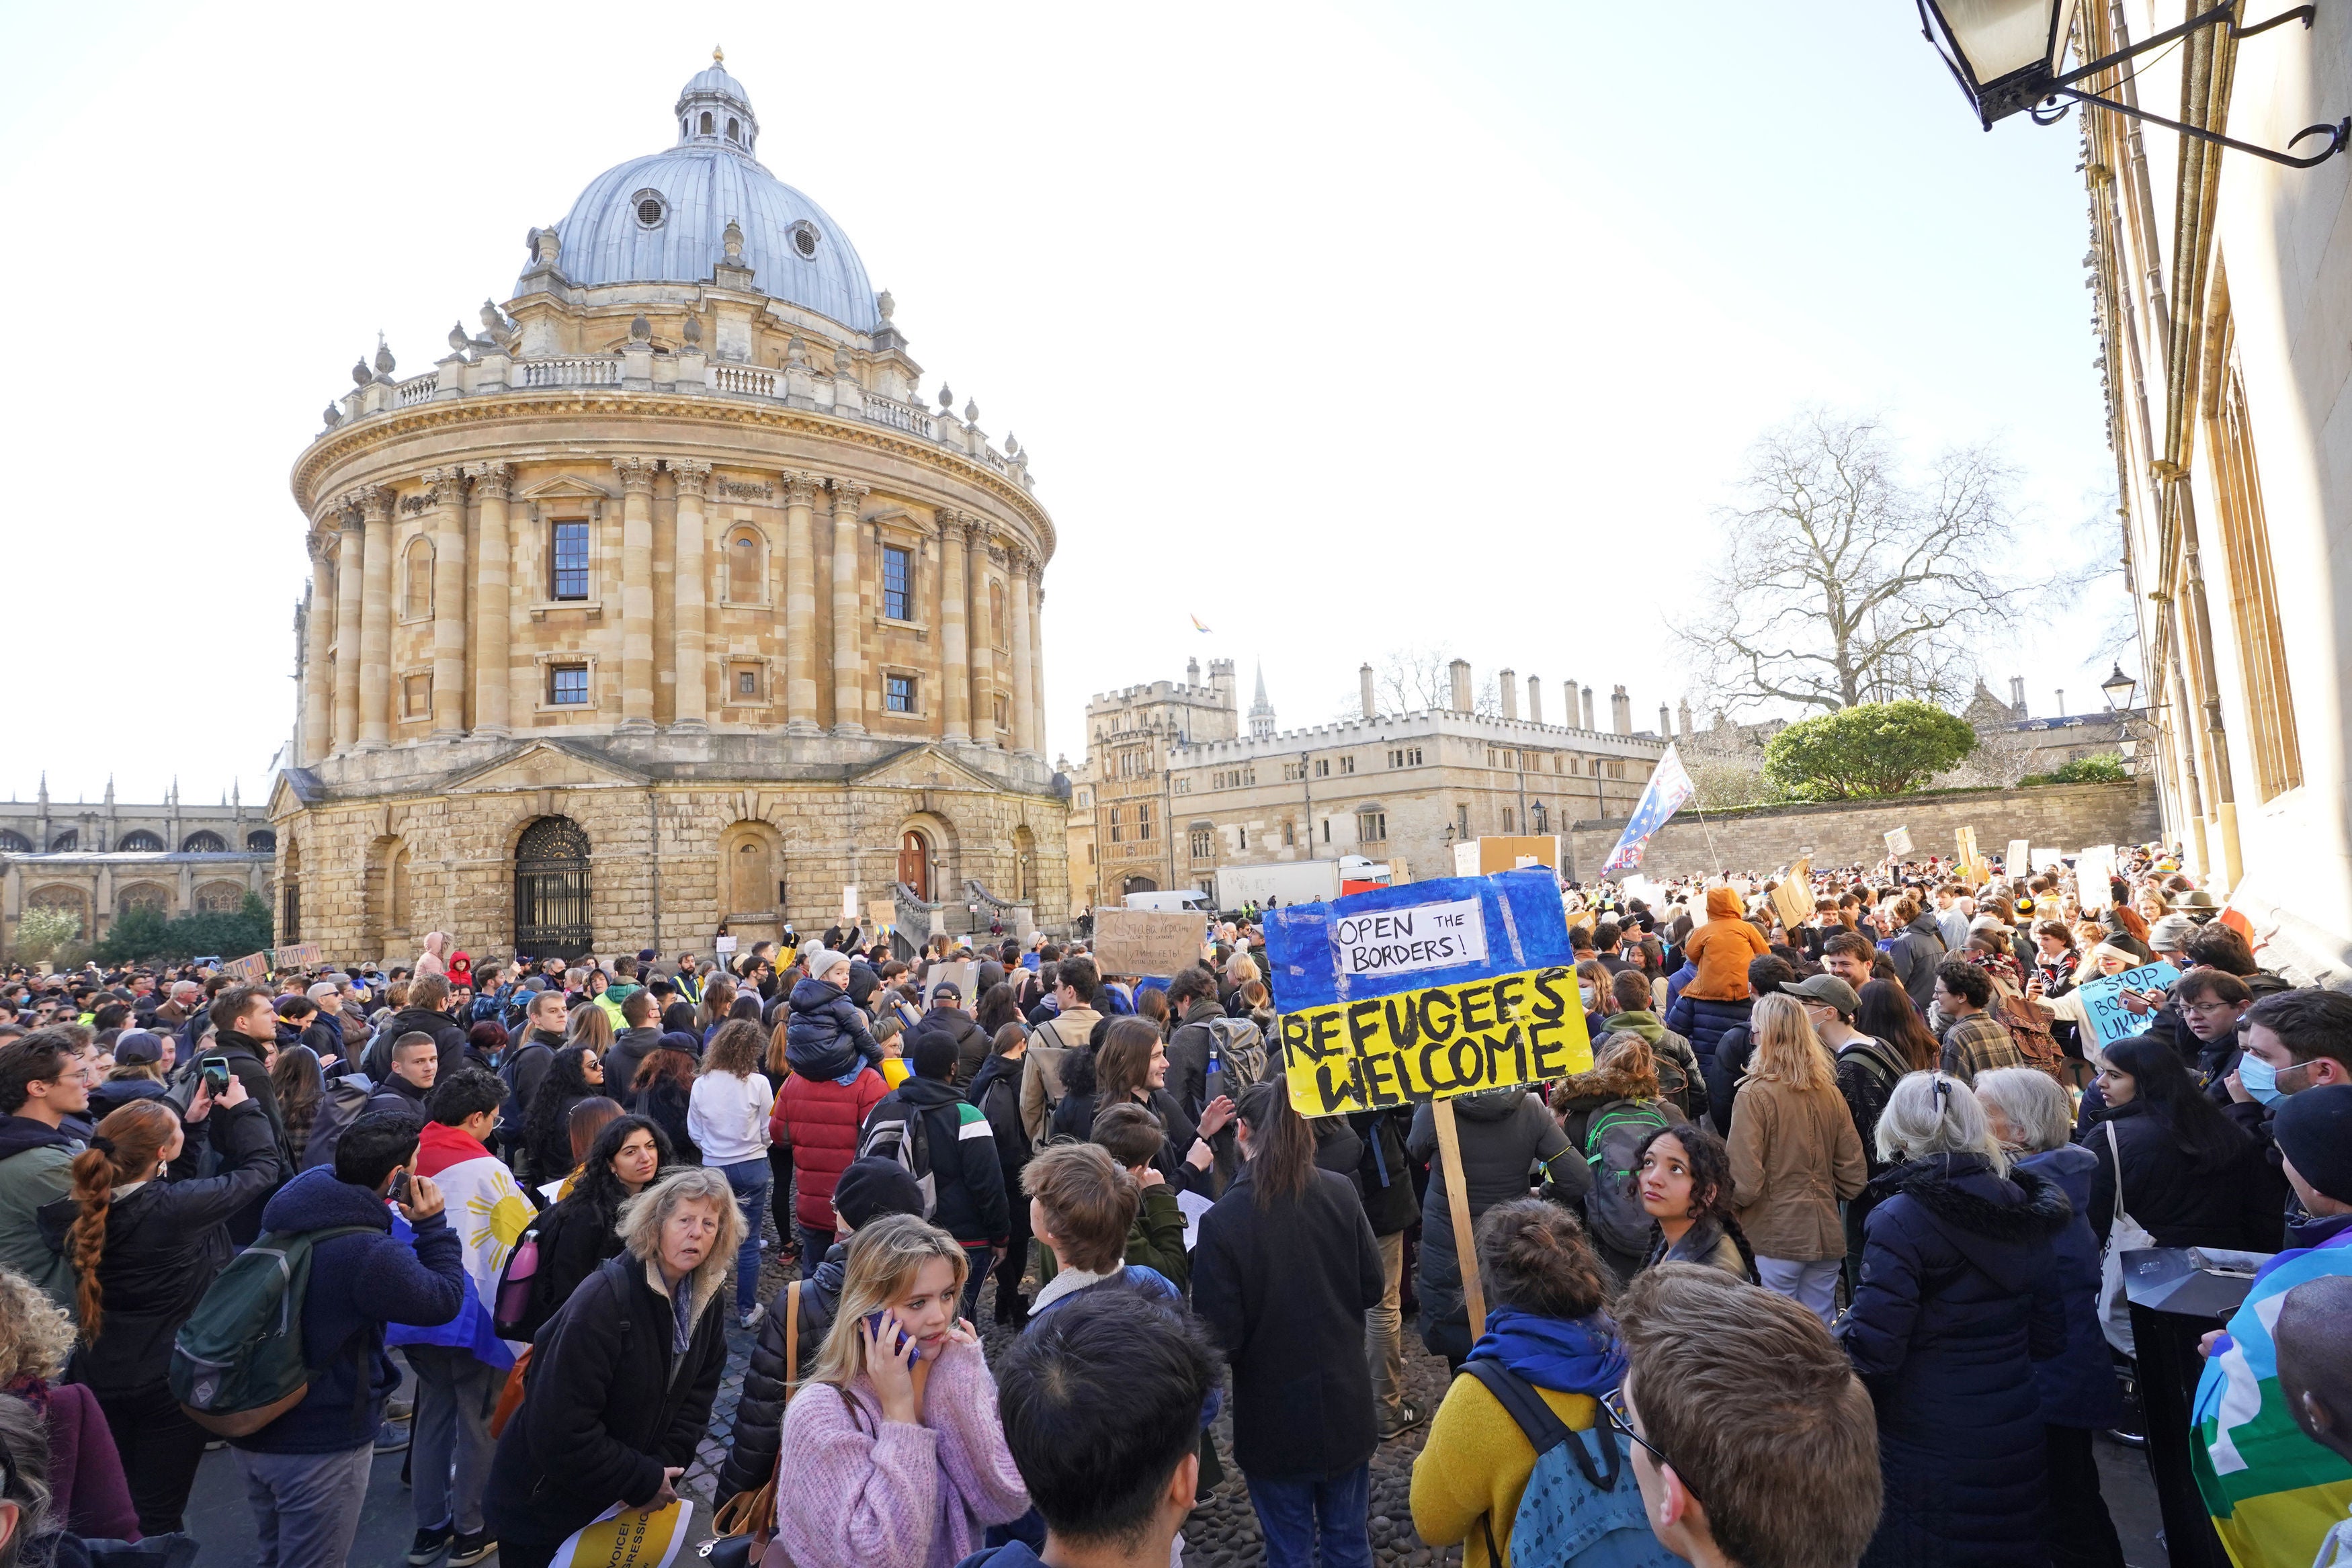 People take part in a demonstration outside the the Radcliffe Camera in Oxford, to denounce the Russian invasion of Ukraine